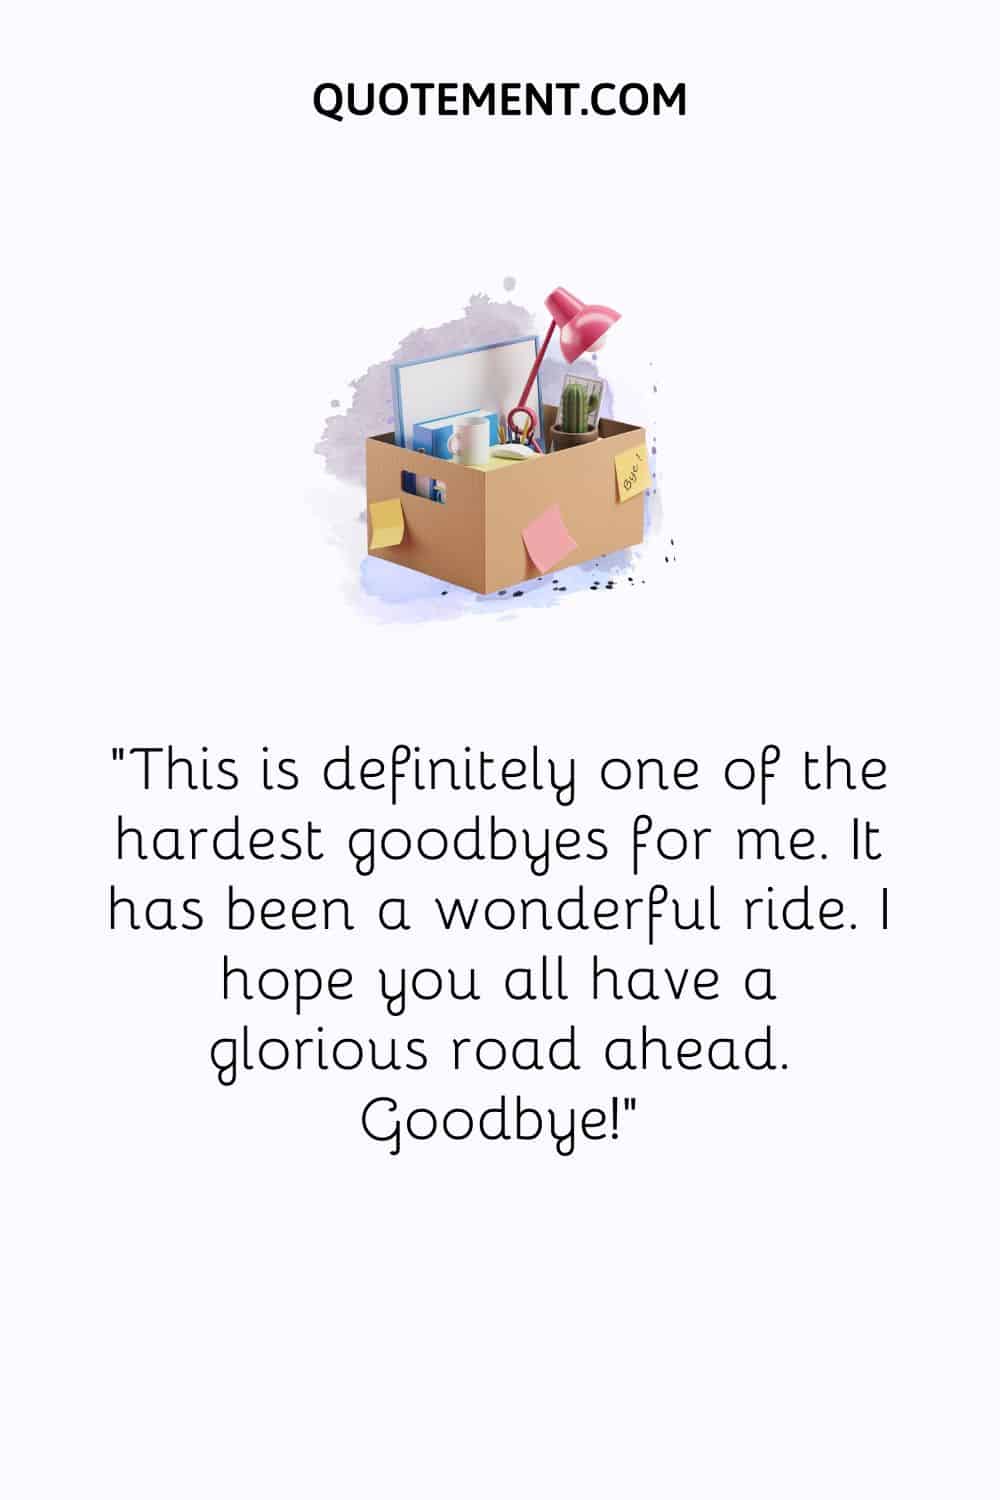 This is definitely one of the hardest goodbyes for me. It has been a wonderful ride. I hope you all have a glorious road ahead. Goodbye!